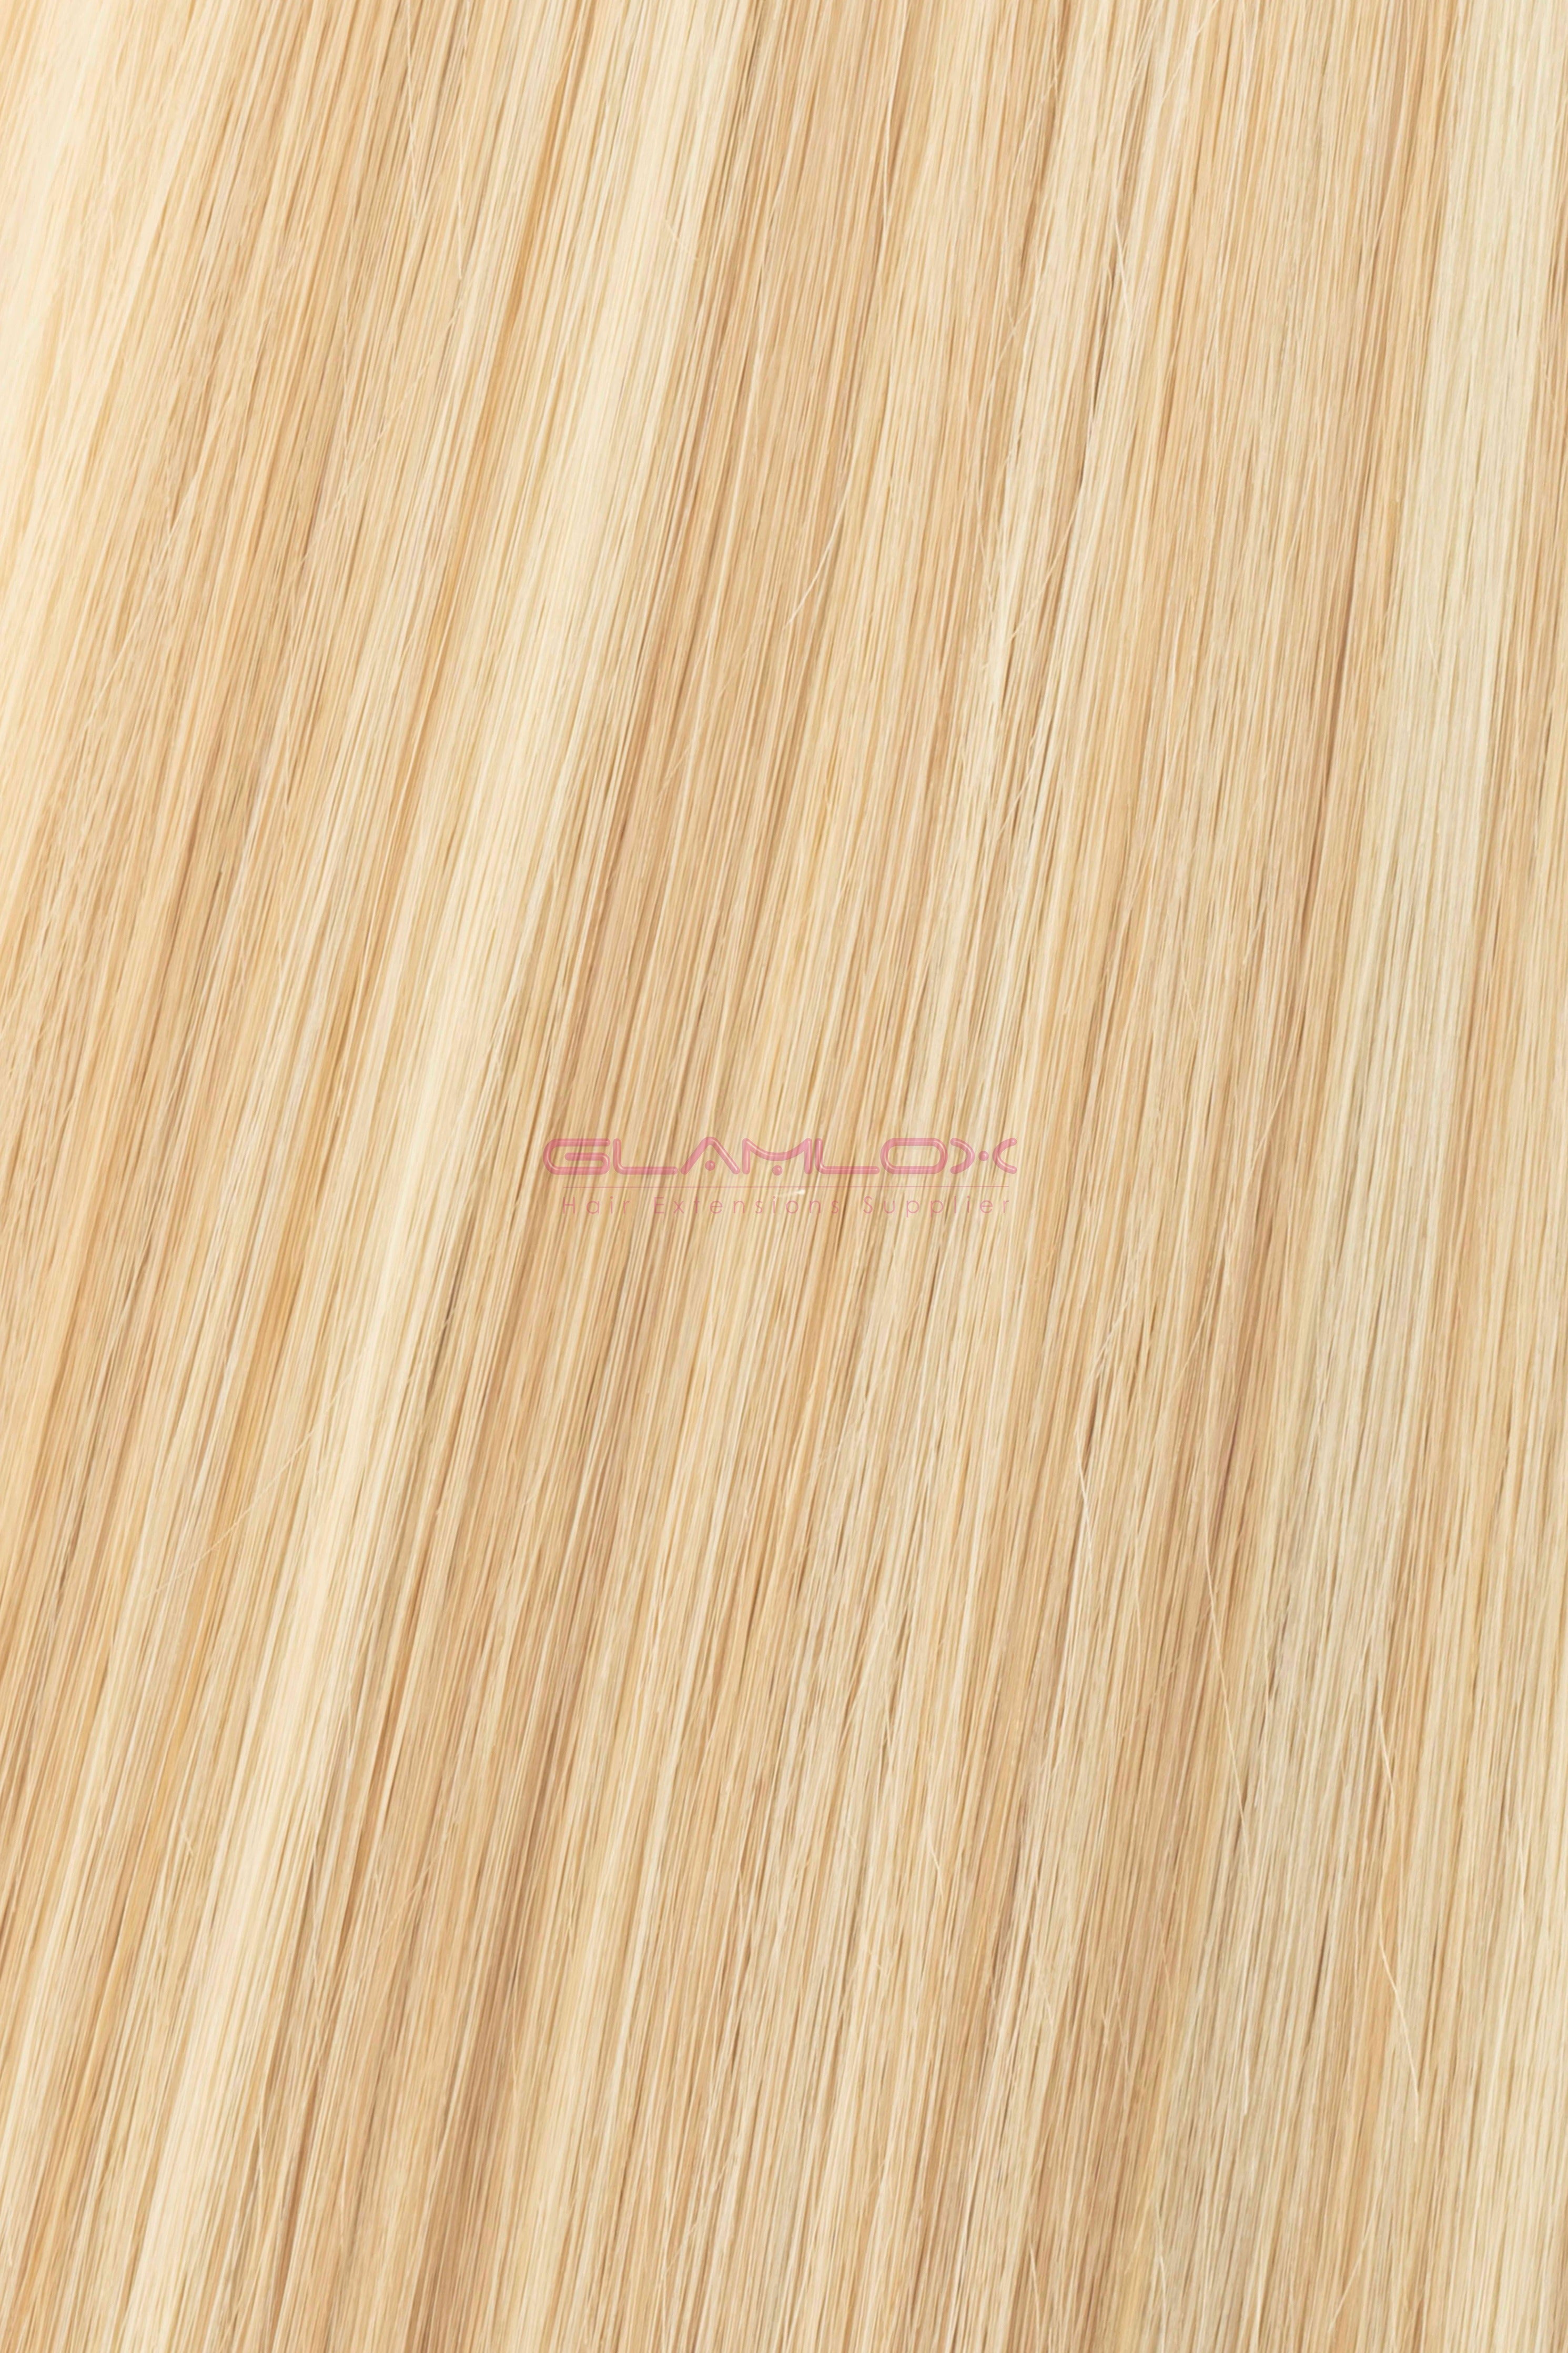 16" Nano Ring Hair Extensions - Russian Mongolian Double Drawn Remy Human Hair - 20 Strands